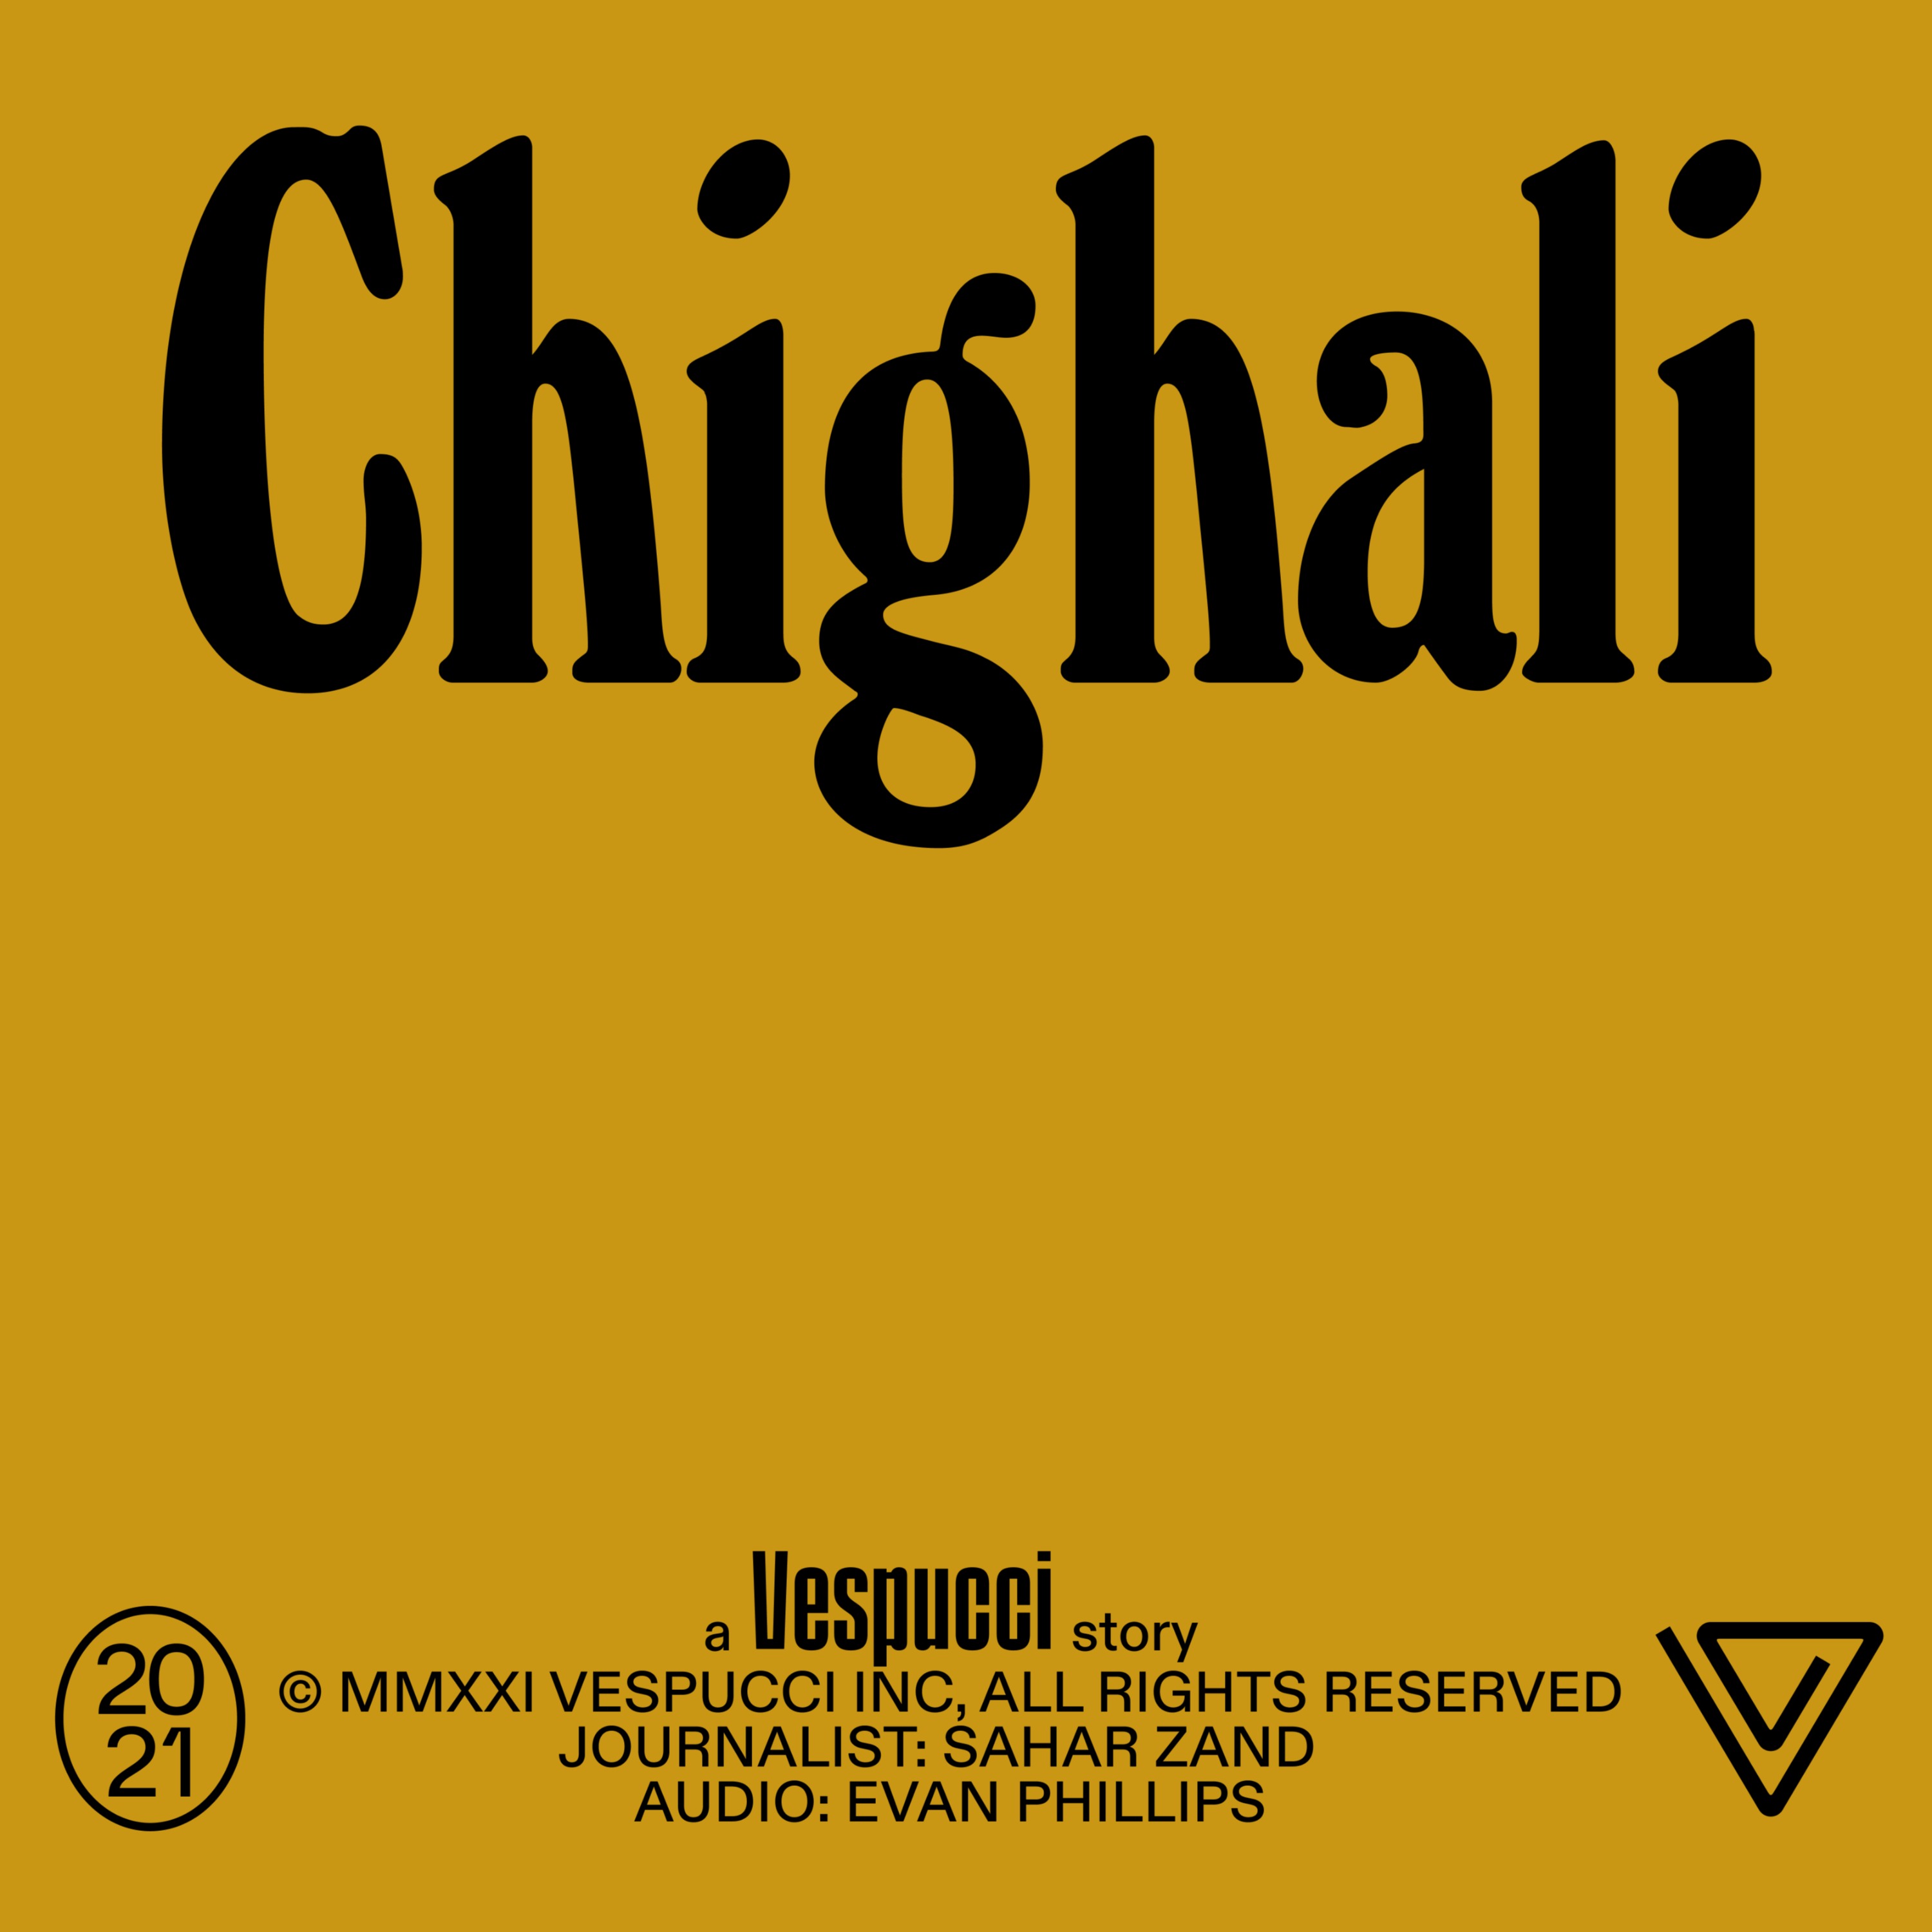 cover art for Chighali